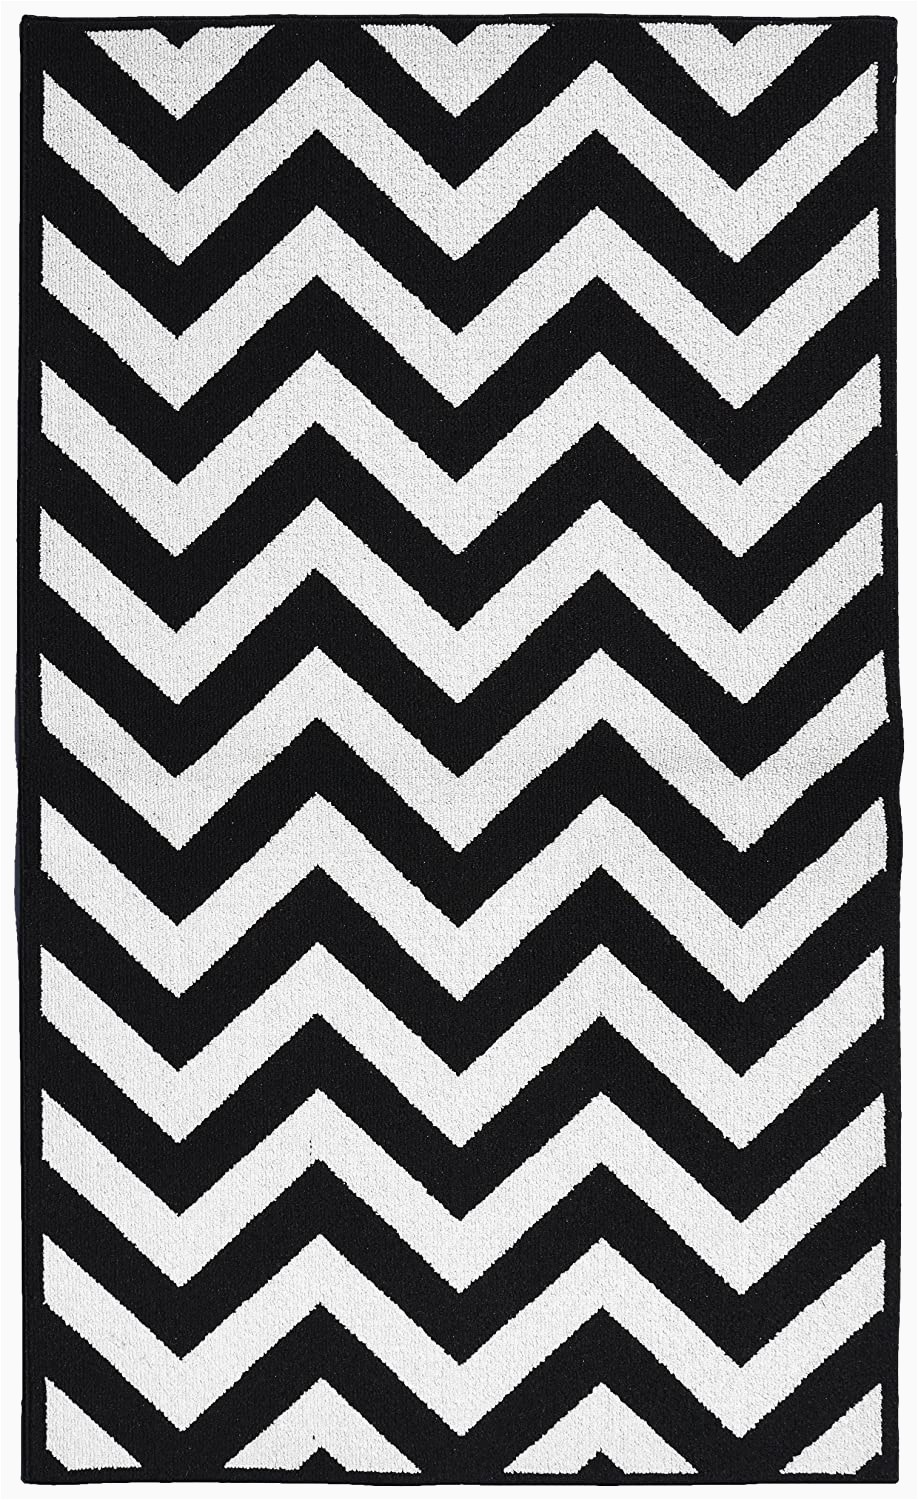 Large Black and White area Rug Garland Rug Chevron area Rug 5 by 7 Feet Black